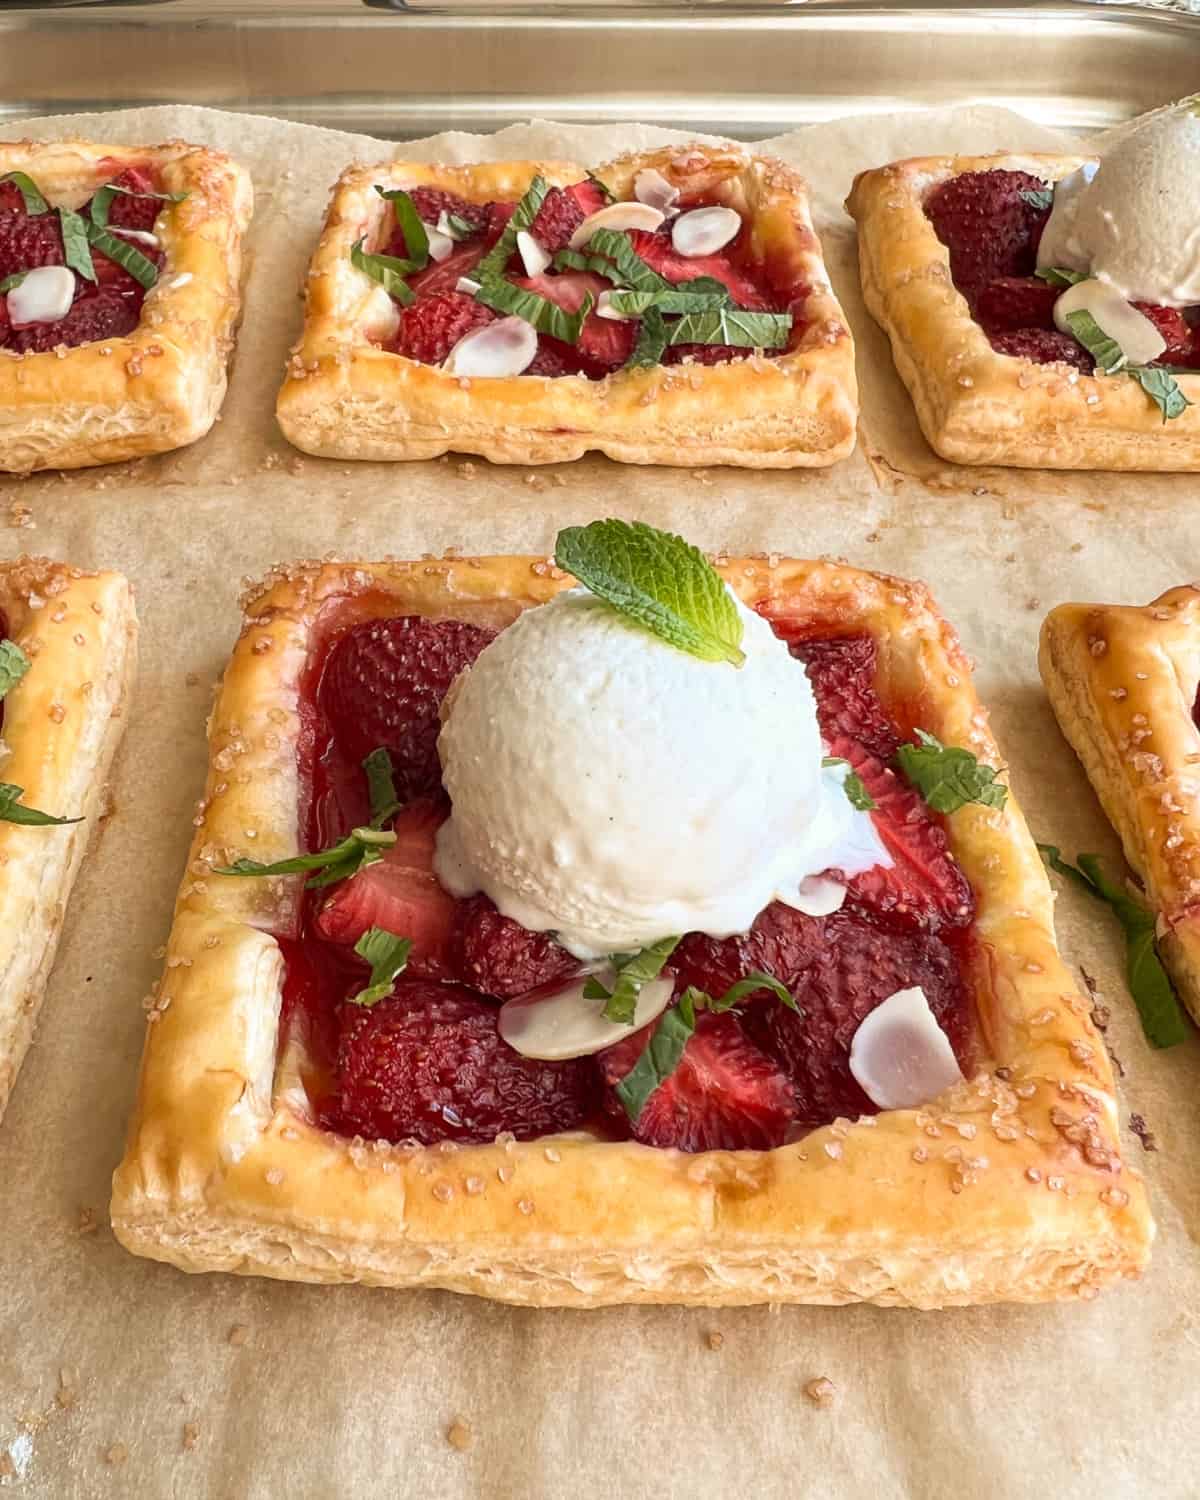 A close up of a fresh strawberry tart served with a scoop of ice cream and mint.